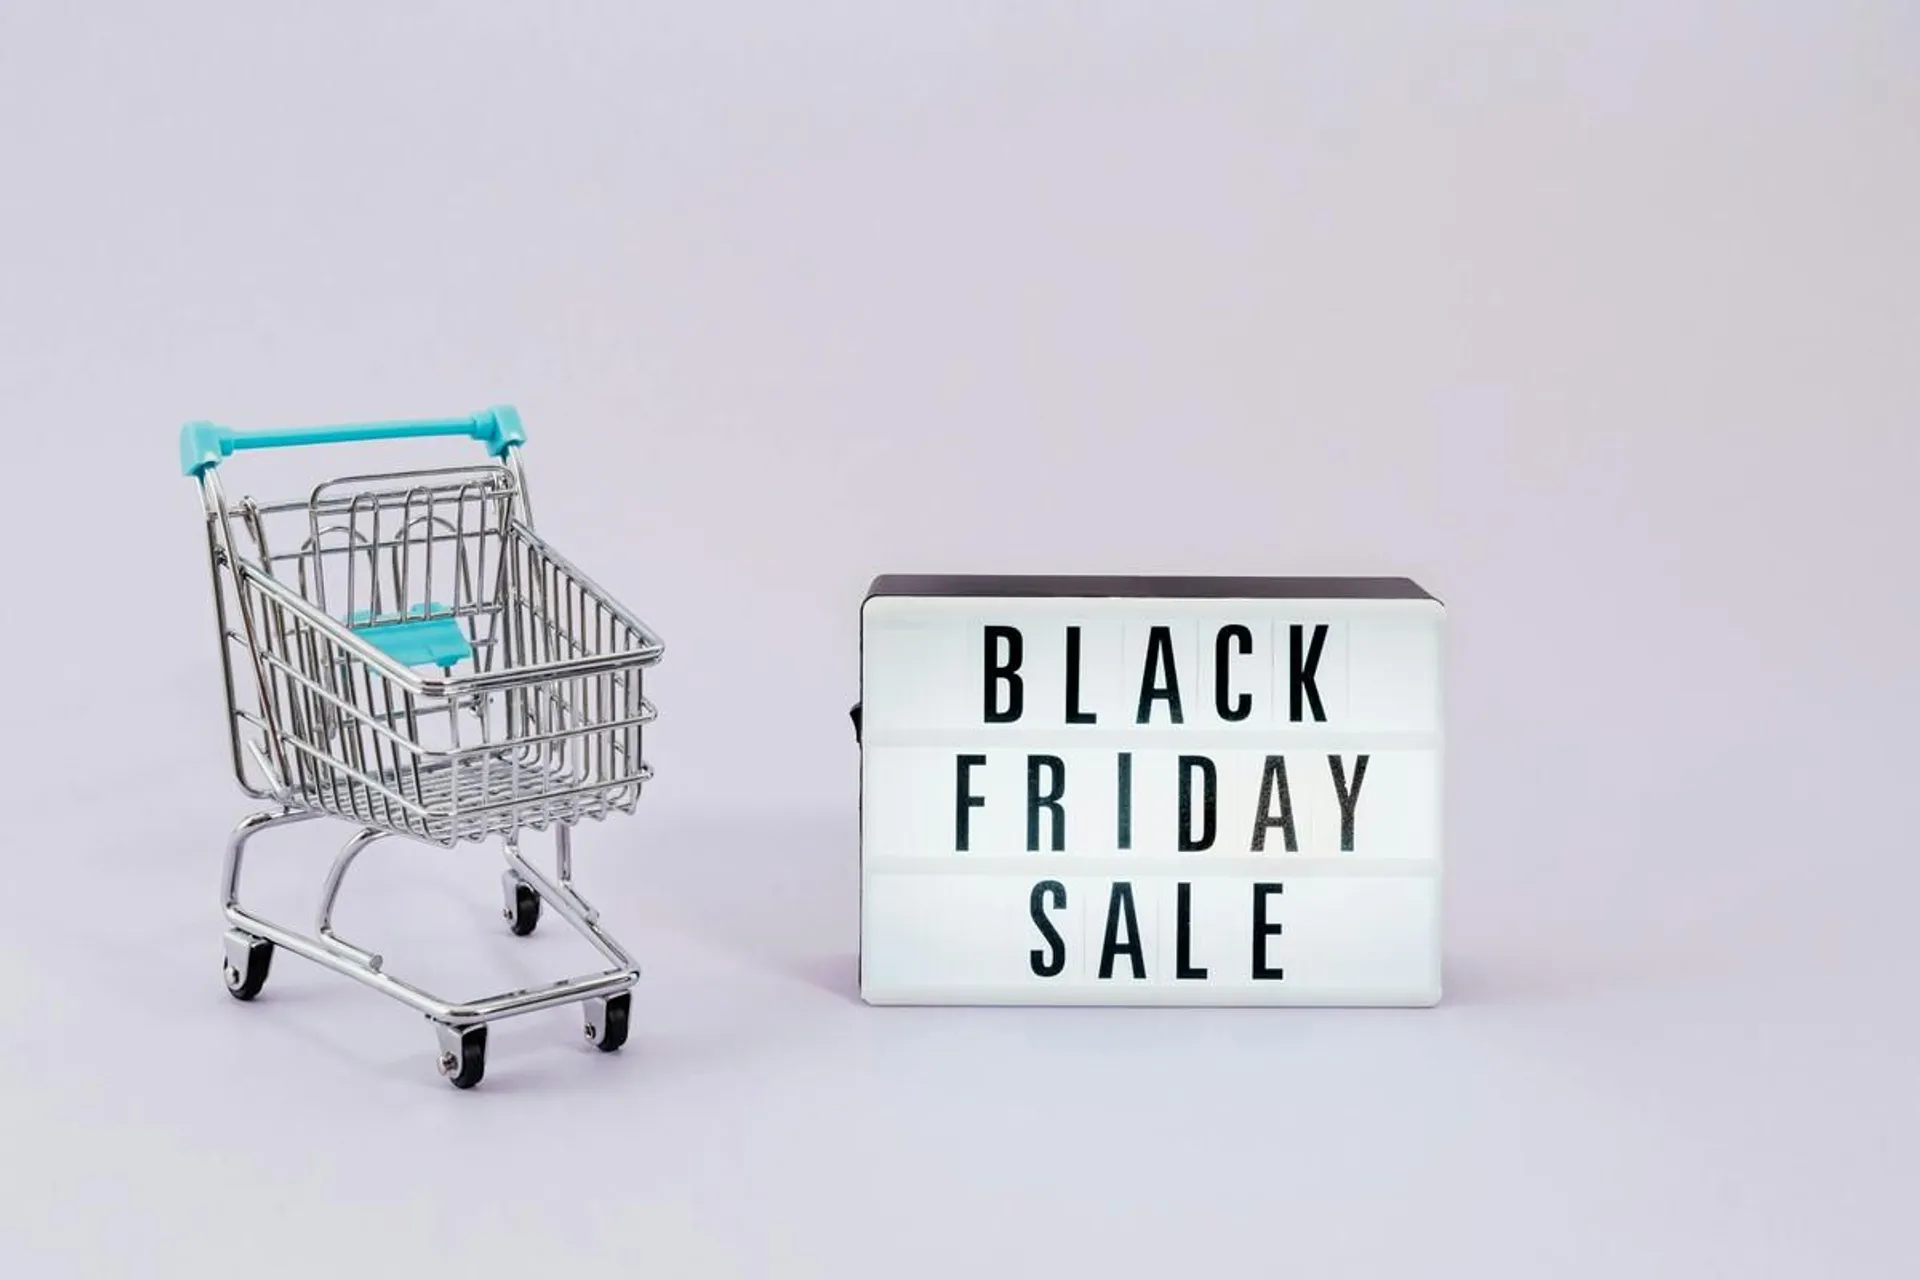 Black Friday: tips for getting the best deals